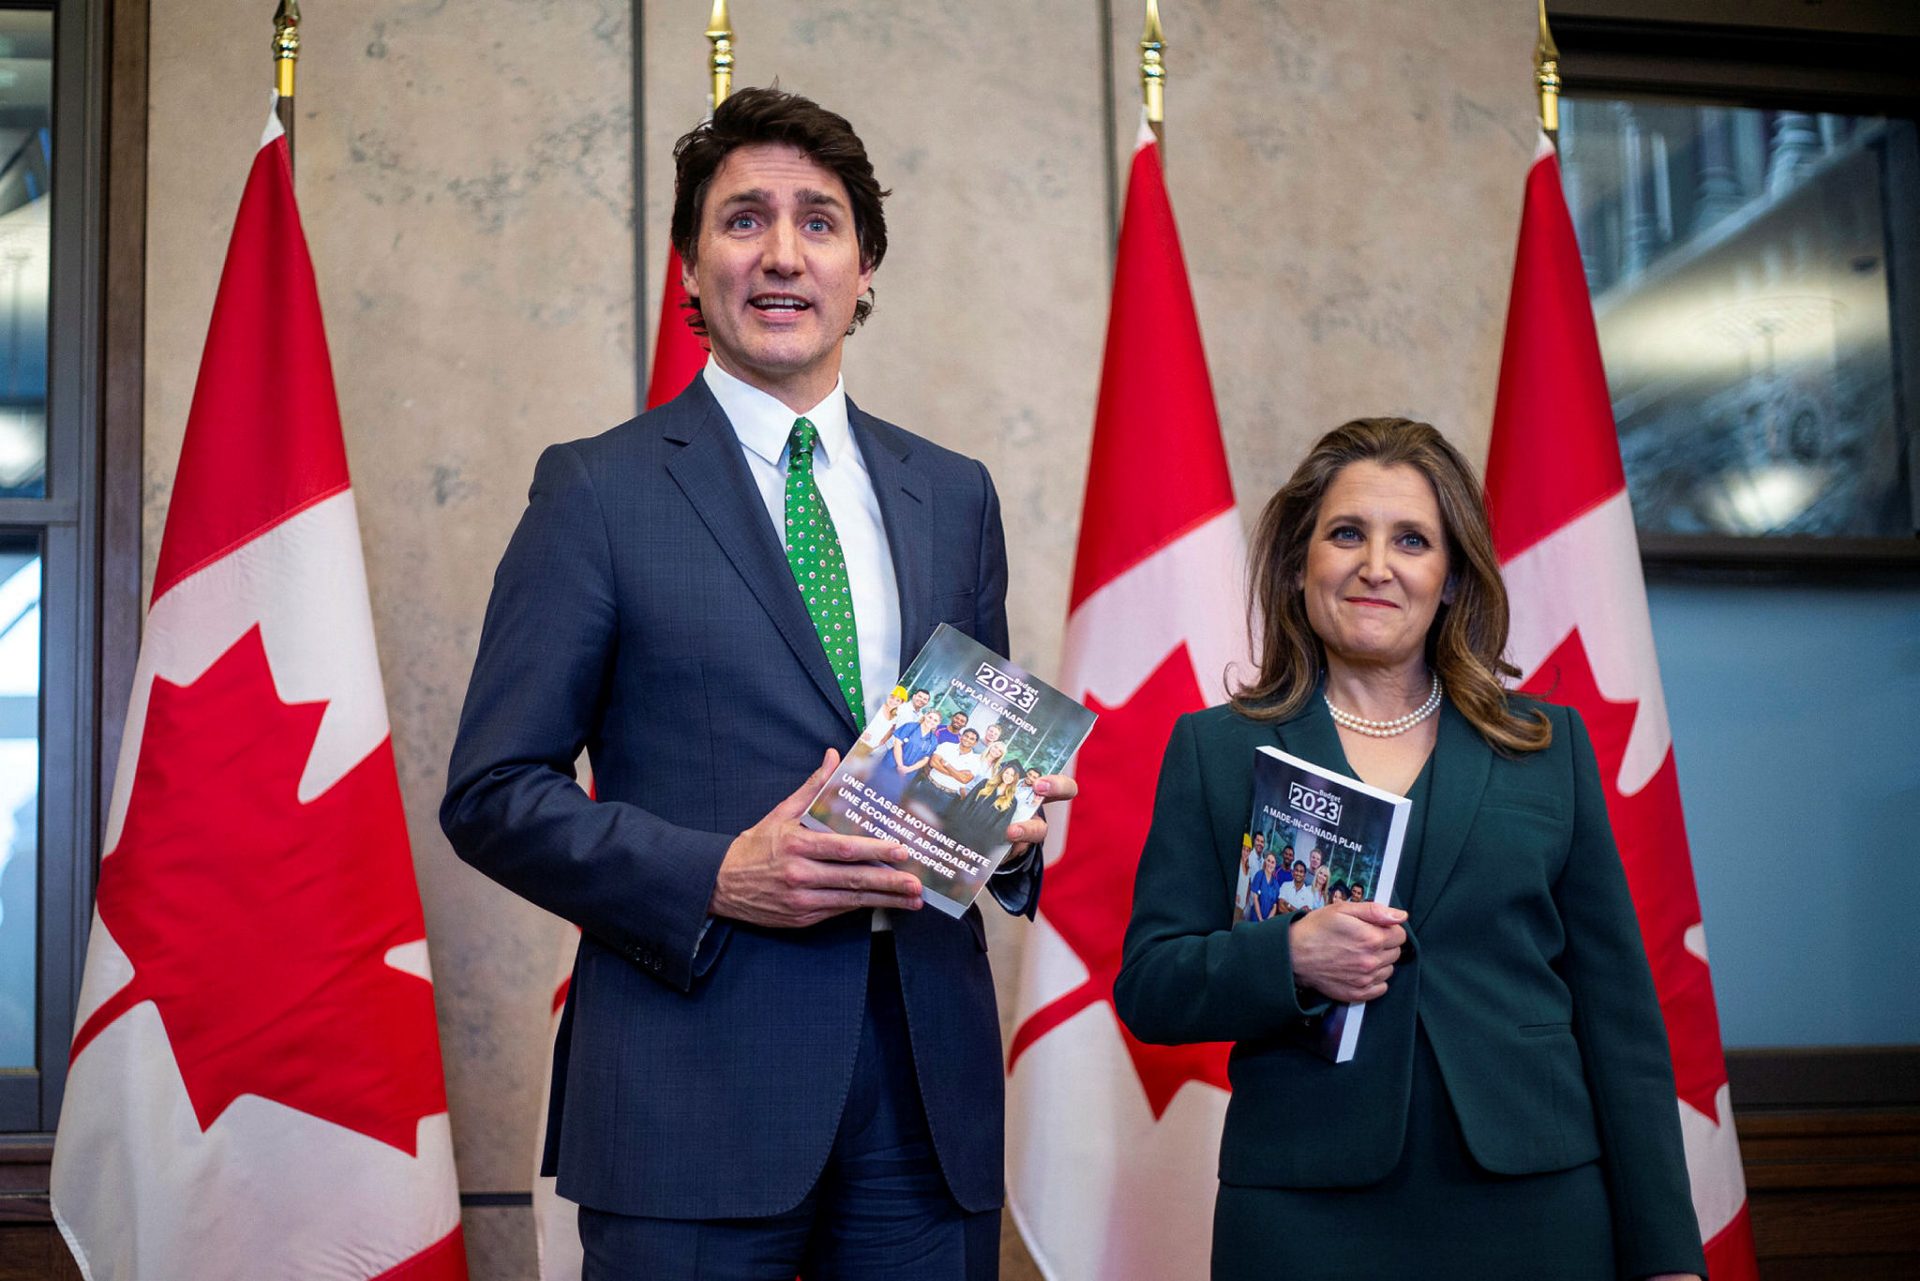 Prime Minister Justin Trudeau and Finance Minister Chrystia Freeland hold a photo op in West Block on March 28, 2023, before tabling the 2023 budget in the House of Commons.
Andrew Meade